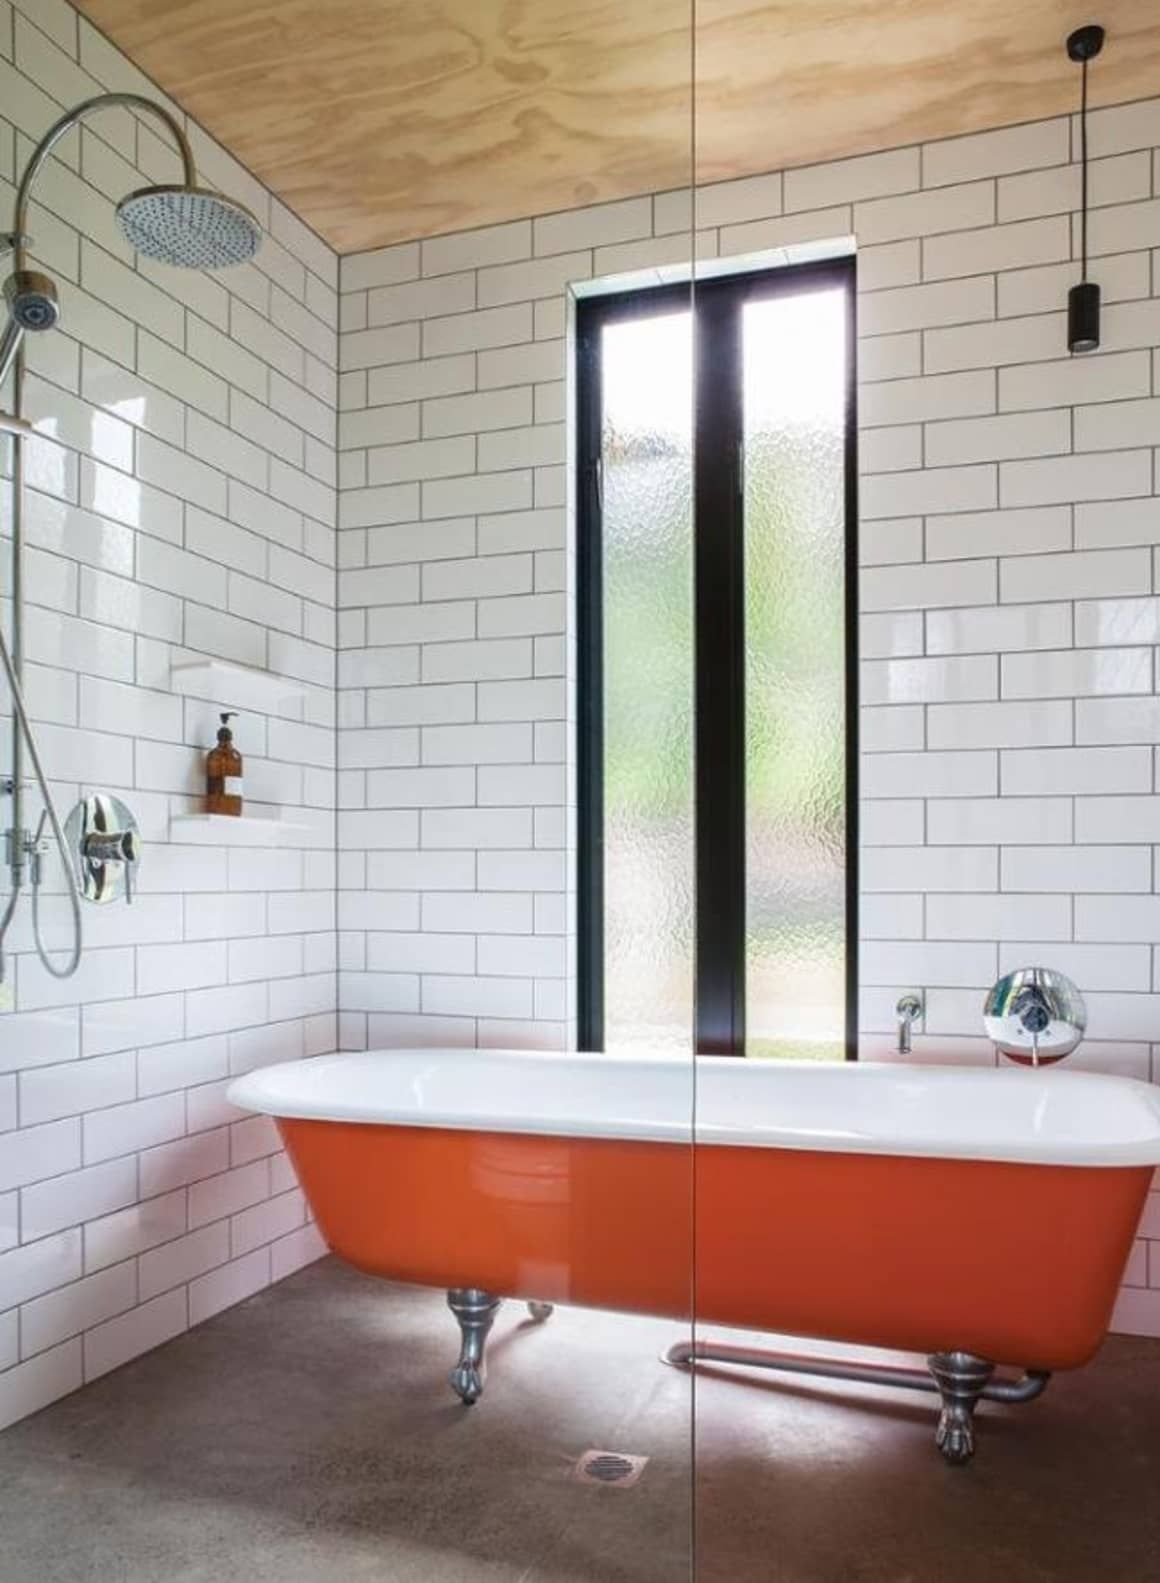 Make the family bathroom more vibrant with the highlight of the colorful bathtub - Photo 10.